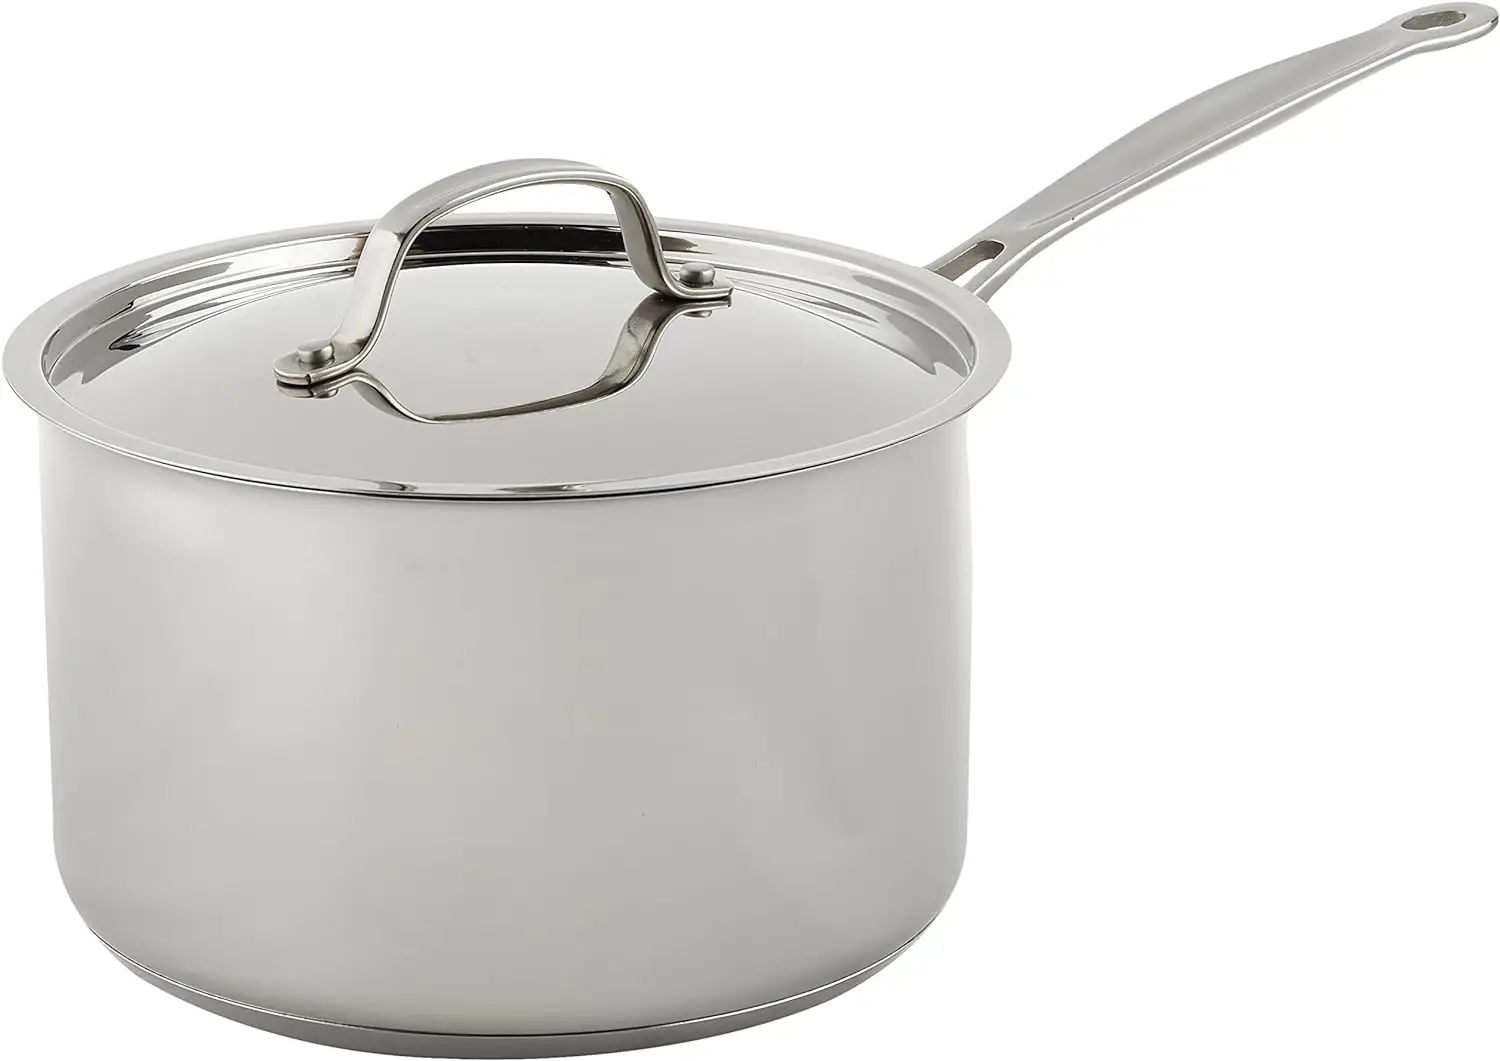 

Chef's Classic Stainless 4-Quart Saucepan with Cover Cooking glass pot Aluminium pan Stainless pot Cookware Stainless steel Kitc